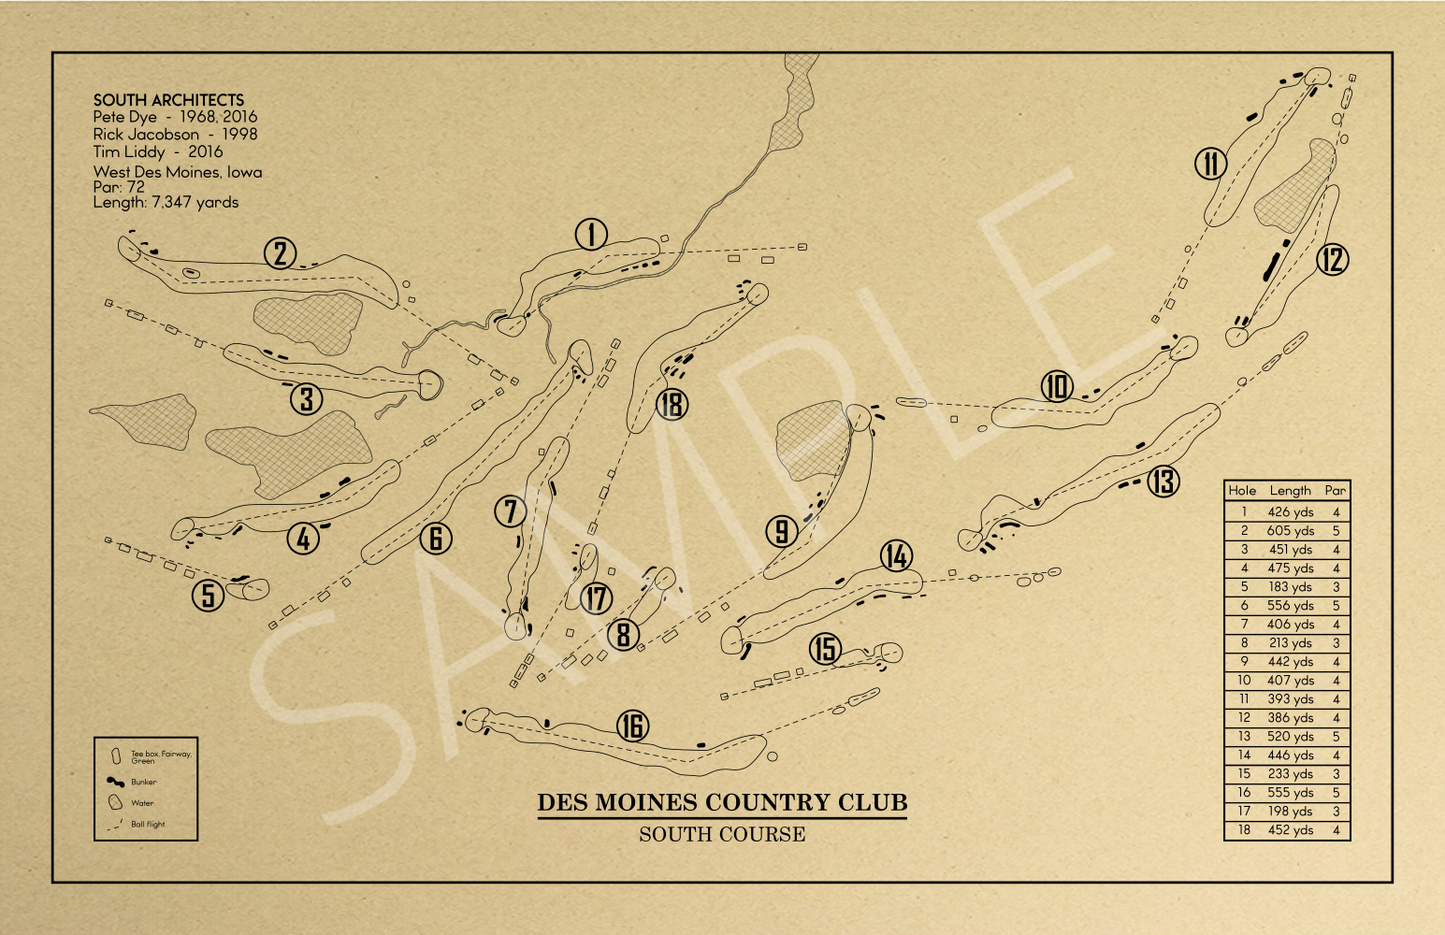 Des Moines Country Club South Course Outline (Print)